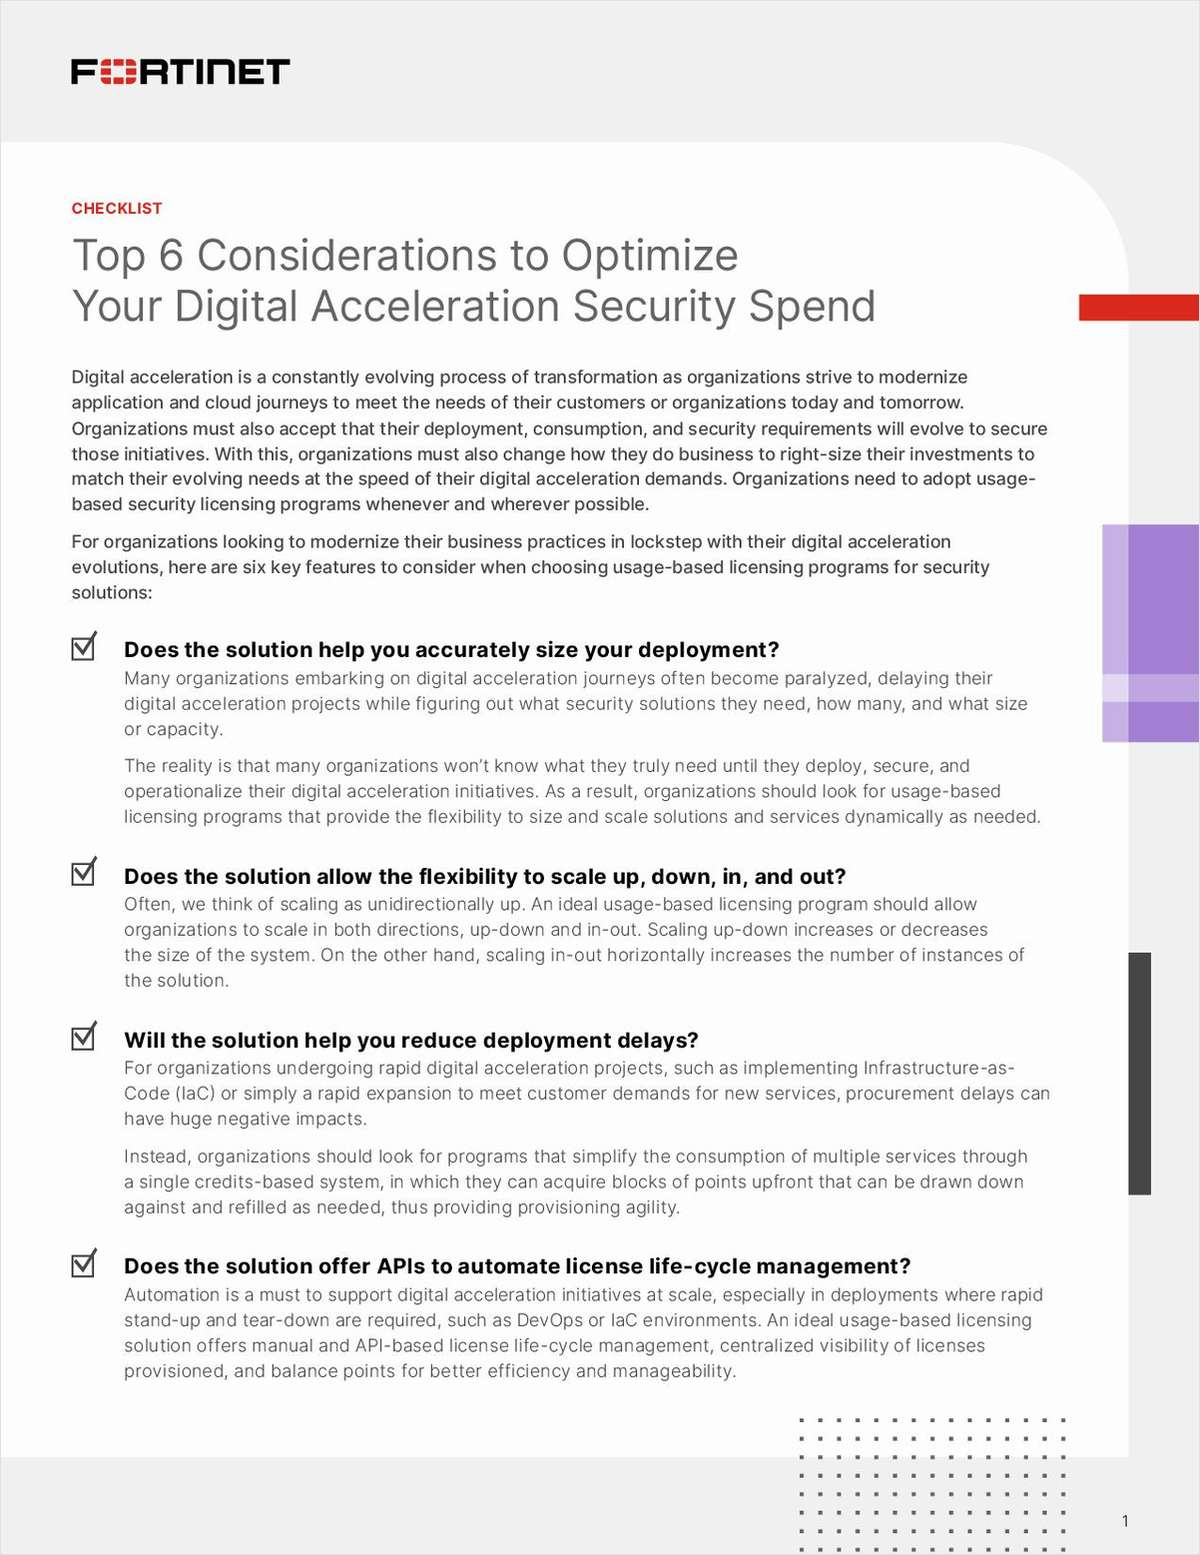 Checklist: Top 6 Considerations to Optimize Your Digital Acceleration Security Spend